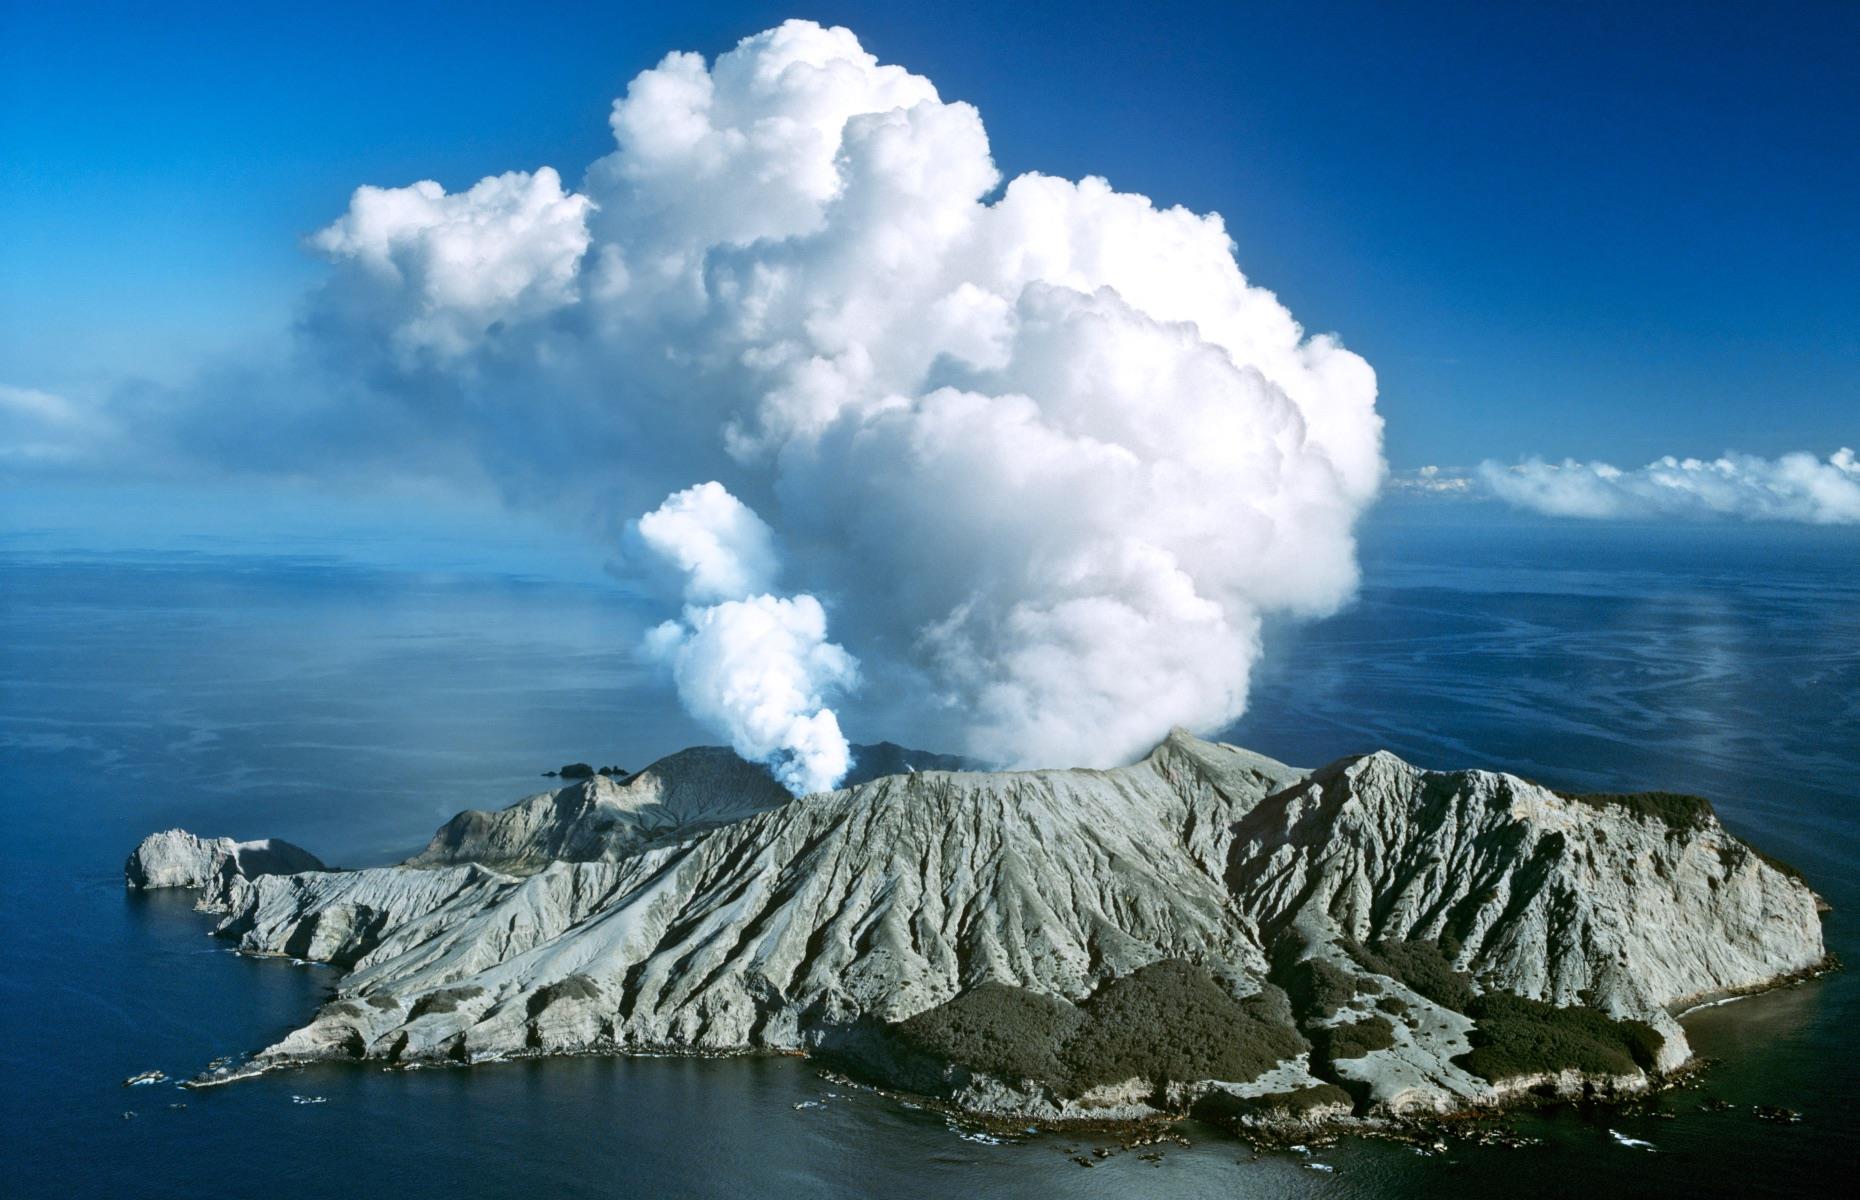 <p>New Zealand’s most active cone volcano, the imposing White Island (also known as Whakaari) forms part of the Pacific Ring of Fire and sits 30 miles offshore from North Island’s east coast. A sudden, explosive eruption in 2019 effectively ended guided tours to the island, but scenic flights over its steaming crater, sulfurous vents, and acid lakes are still available, taking off from nearby Whakatane, Rotorua, or Tauranga.</p>